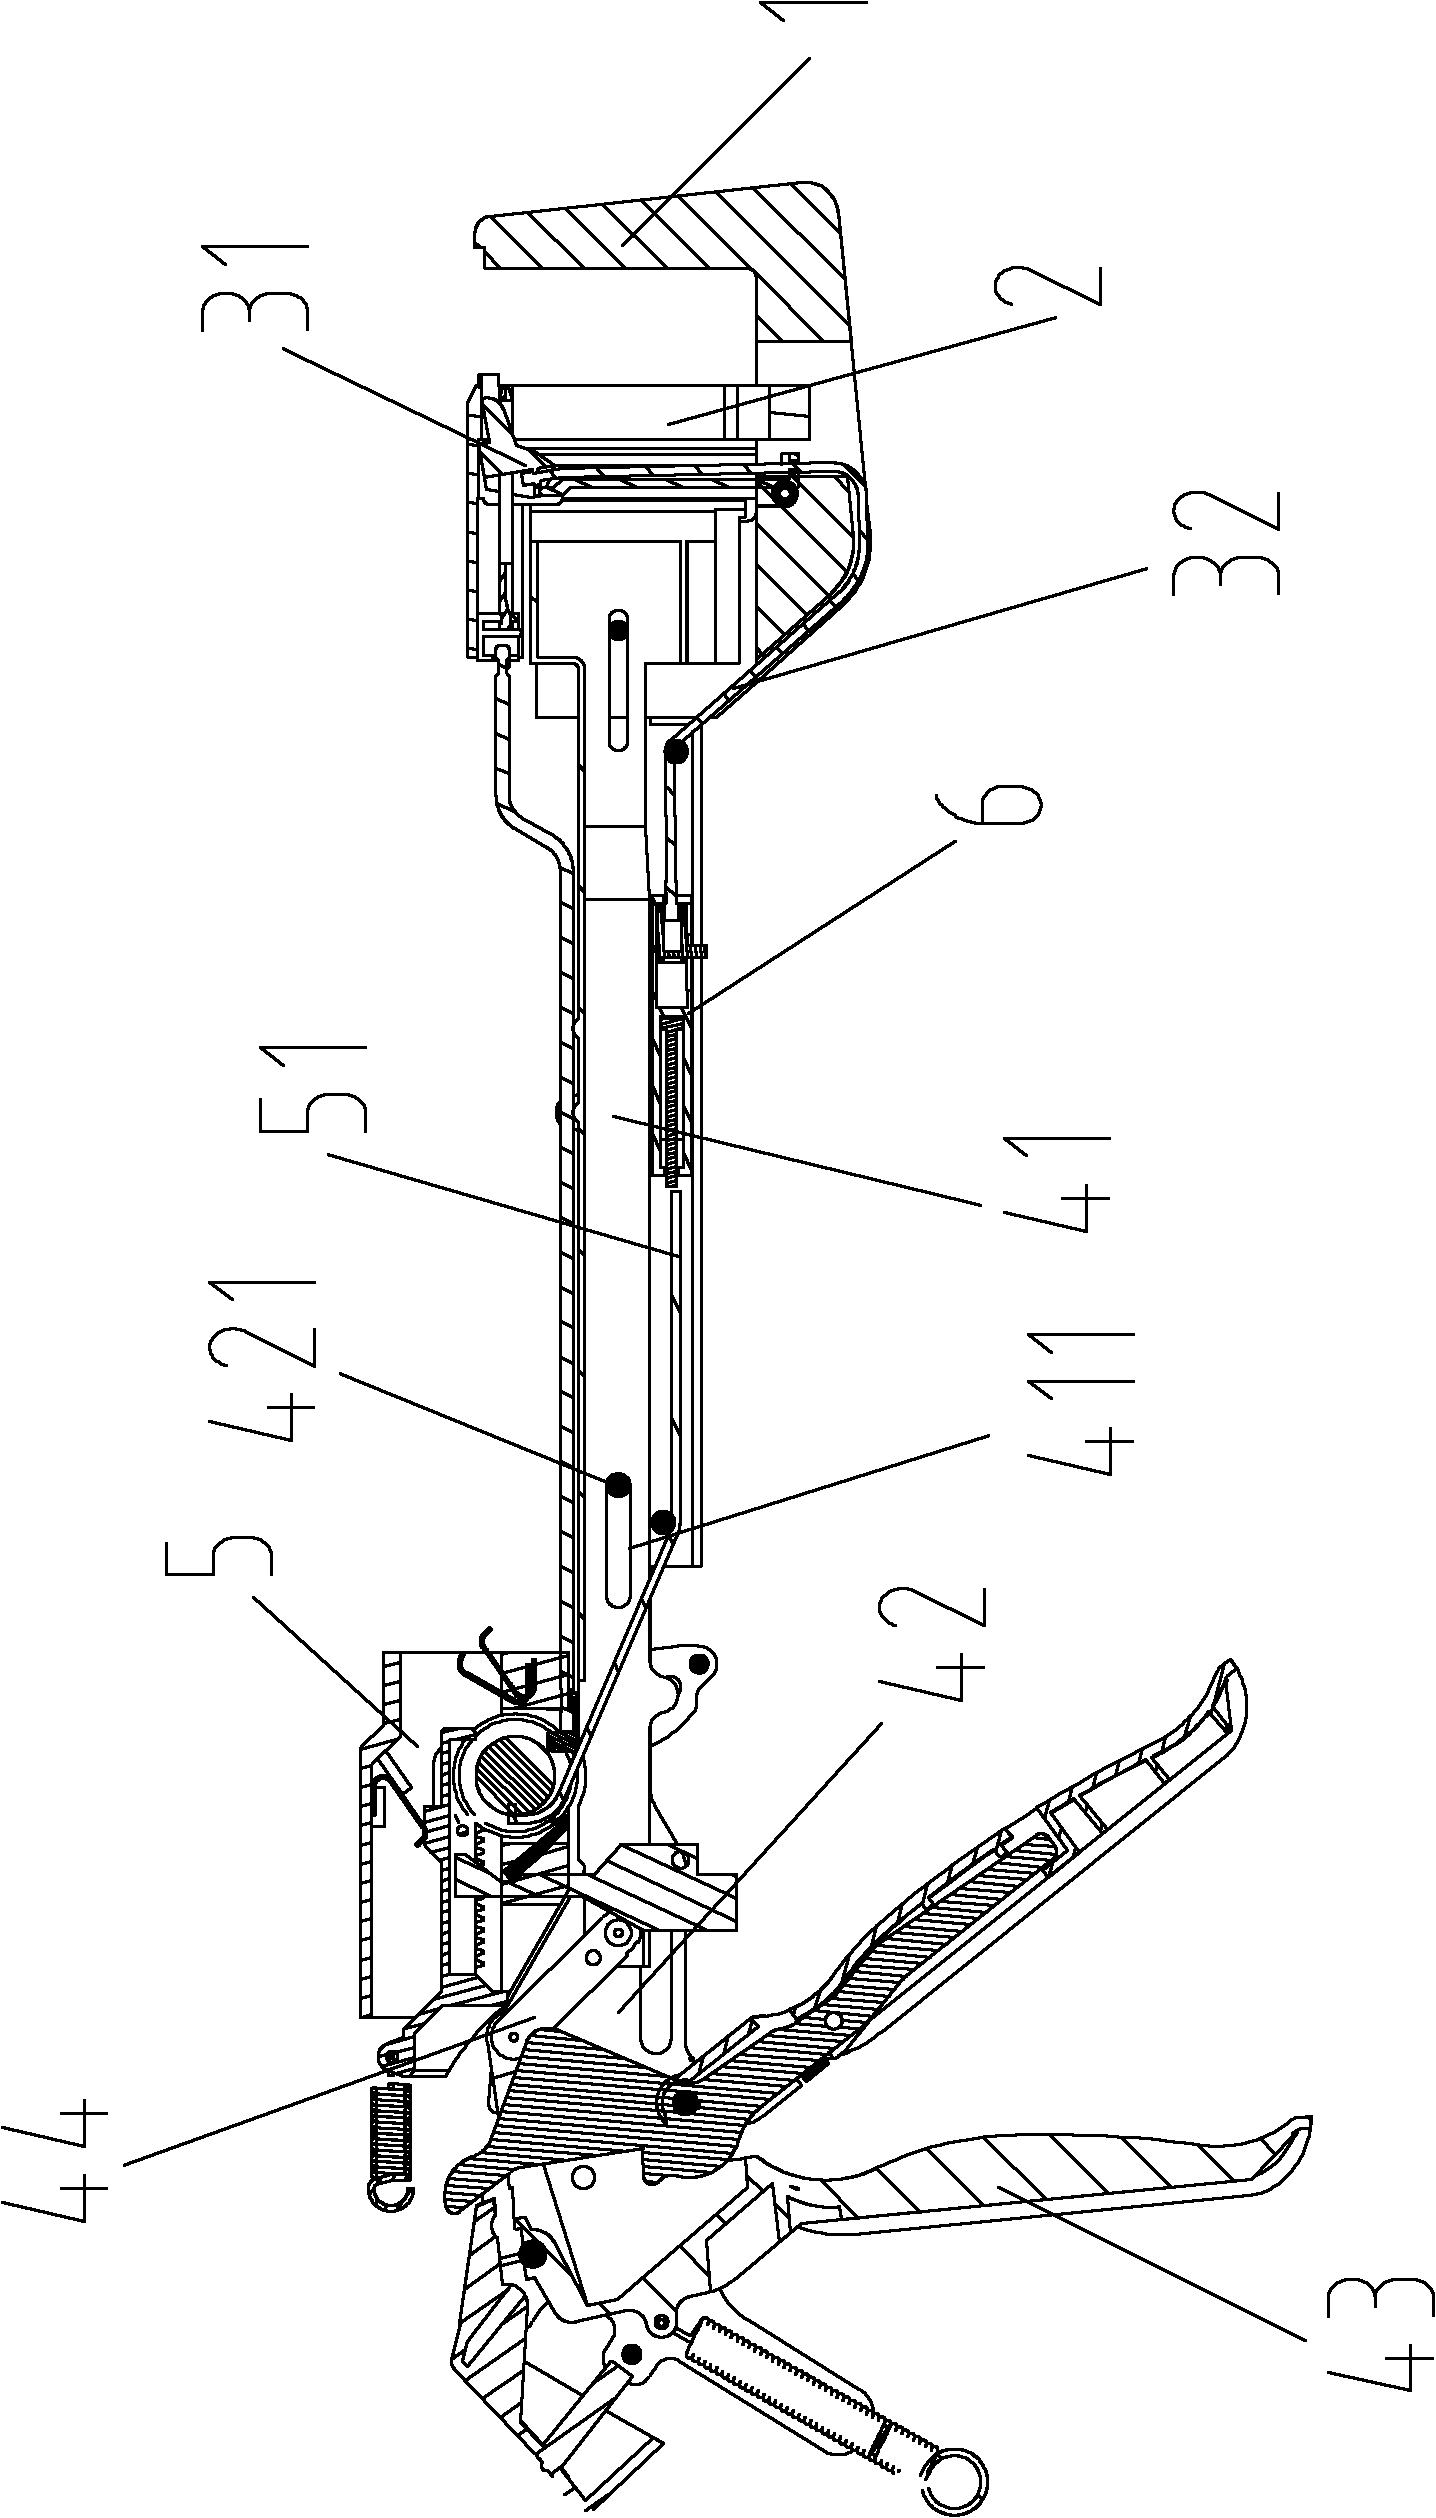 Stitching instrument with cutter